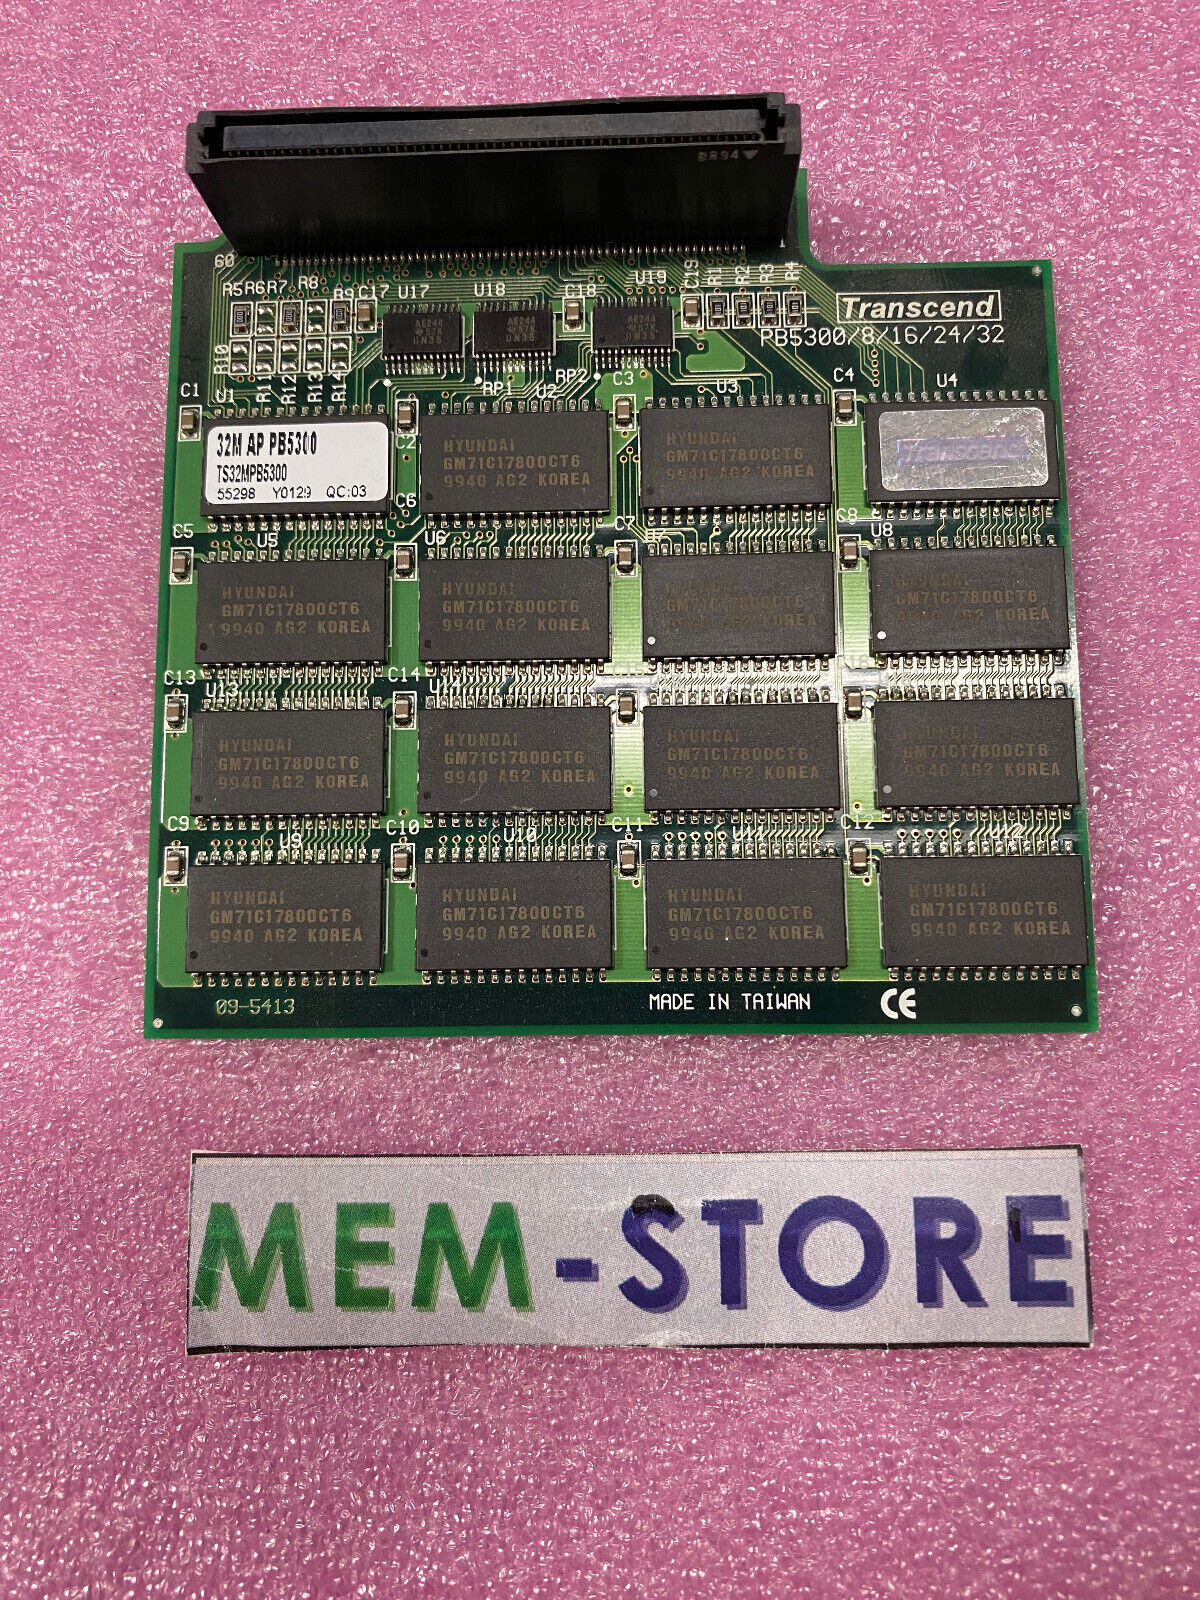 TS32MPB5300 32MB Memory Card for APPLE POWER BOOK 5300/8/16/24/32